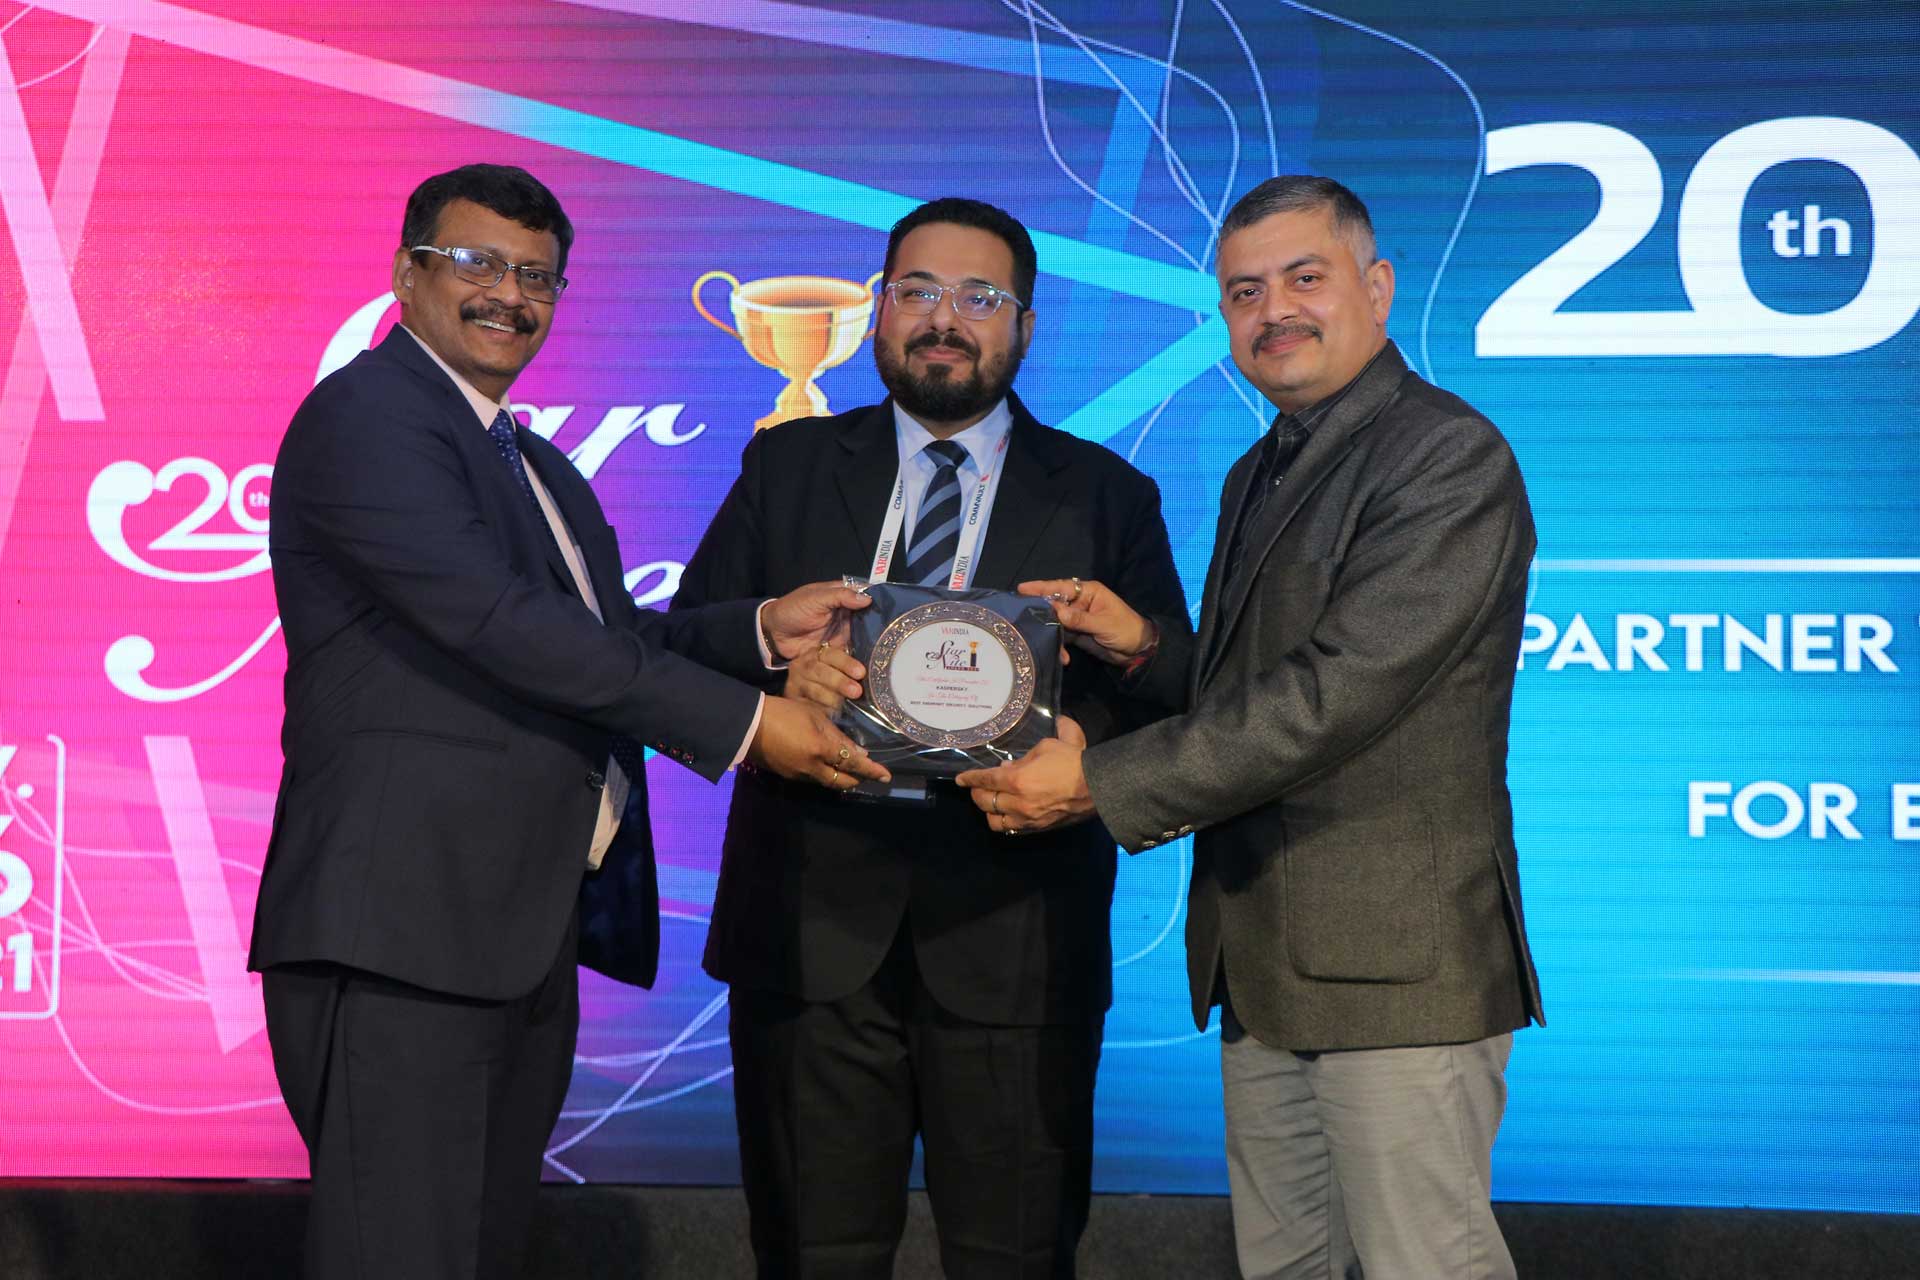 Best End Point Security Solutions Company Award goes to Kaspersky at 20th Star Nite Awards 2021